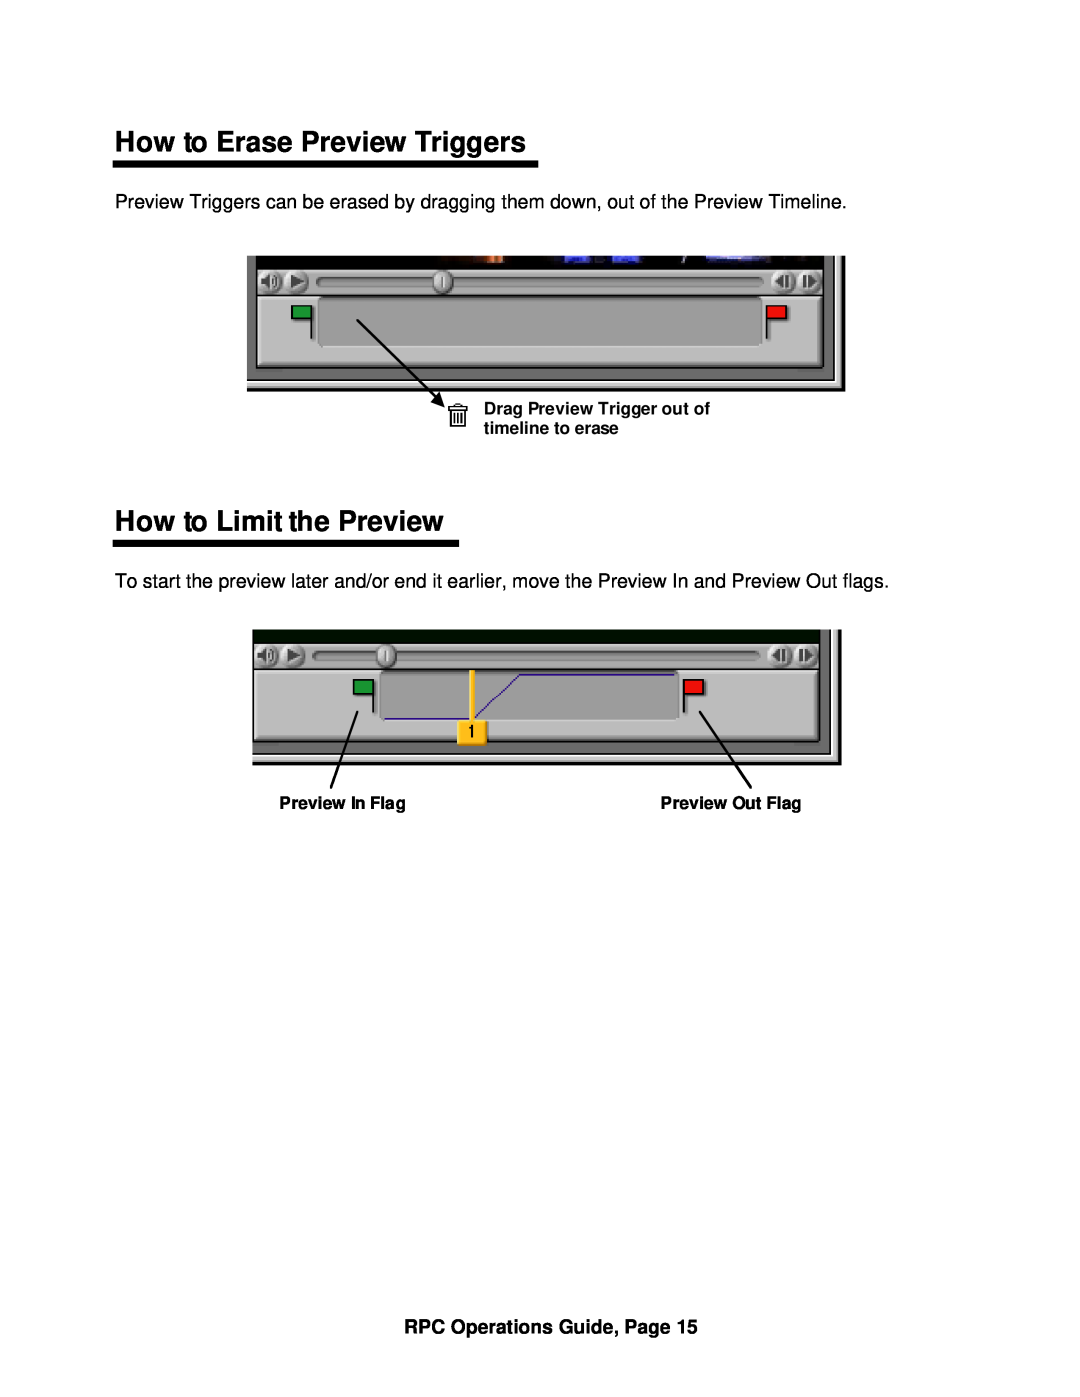 ARRI ARRI Ramp Preview Controller How to Erase Preview Triggers, How to Limit the Preview, RPC Operations Guide, Page 